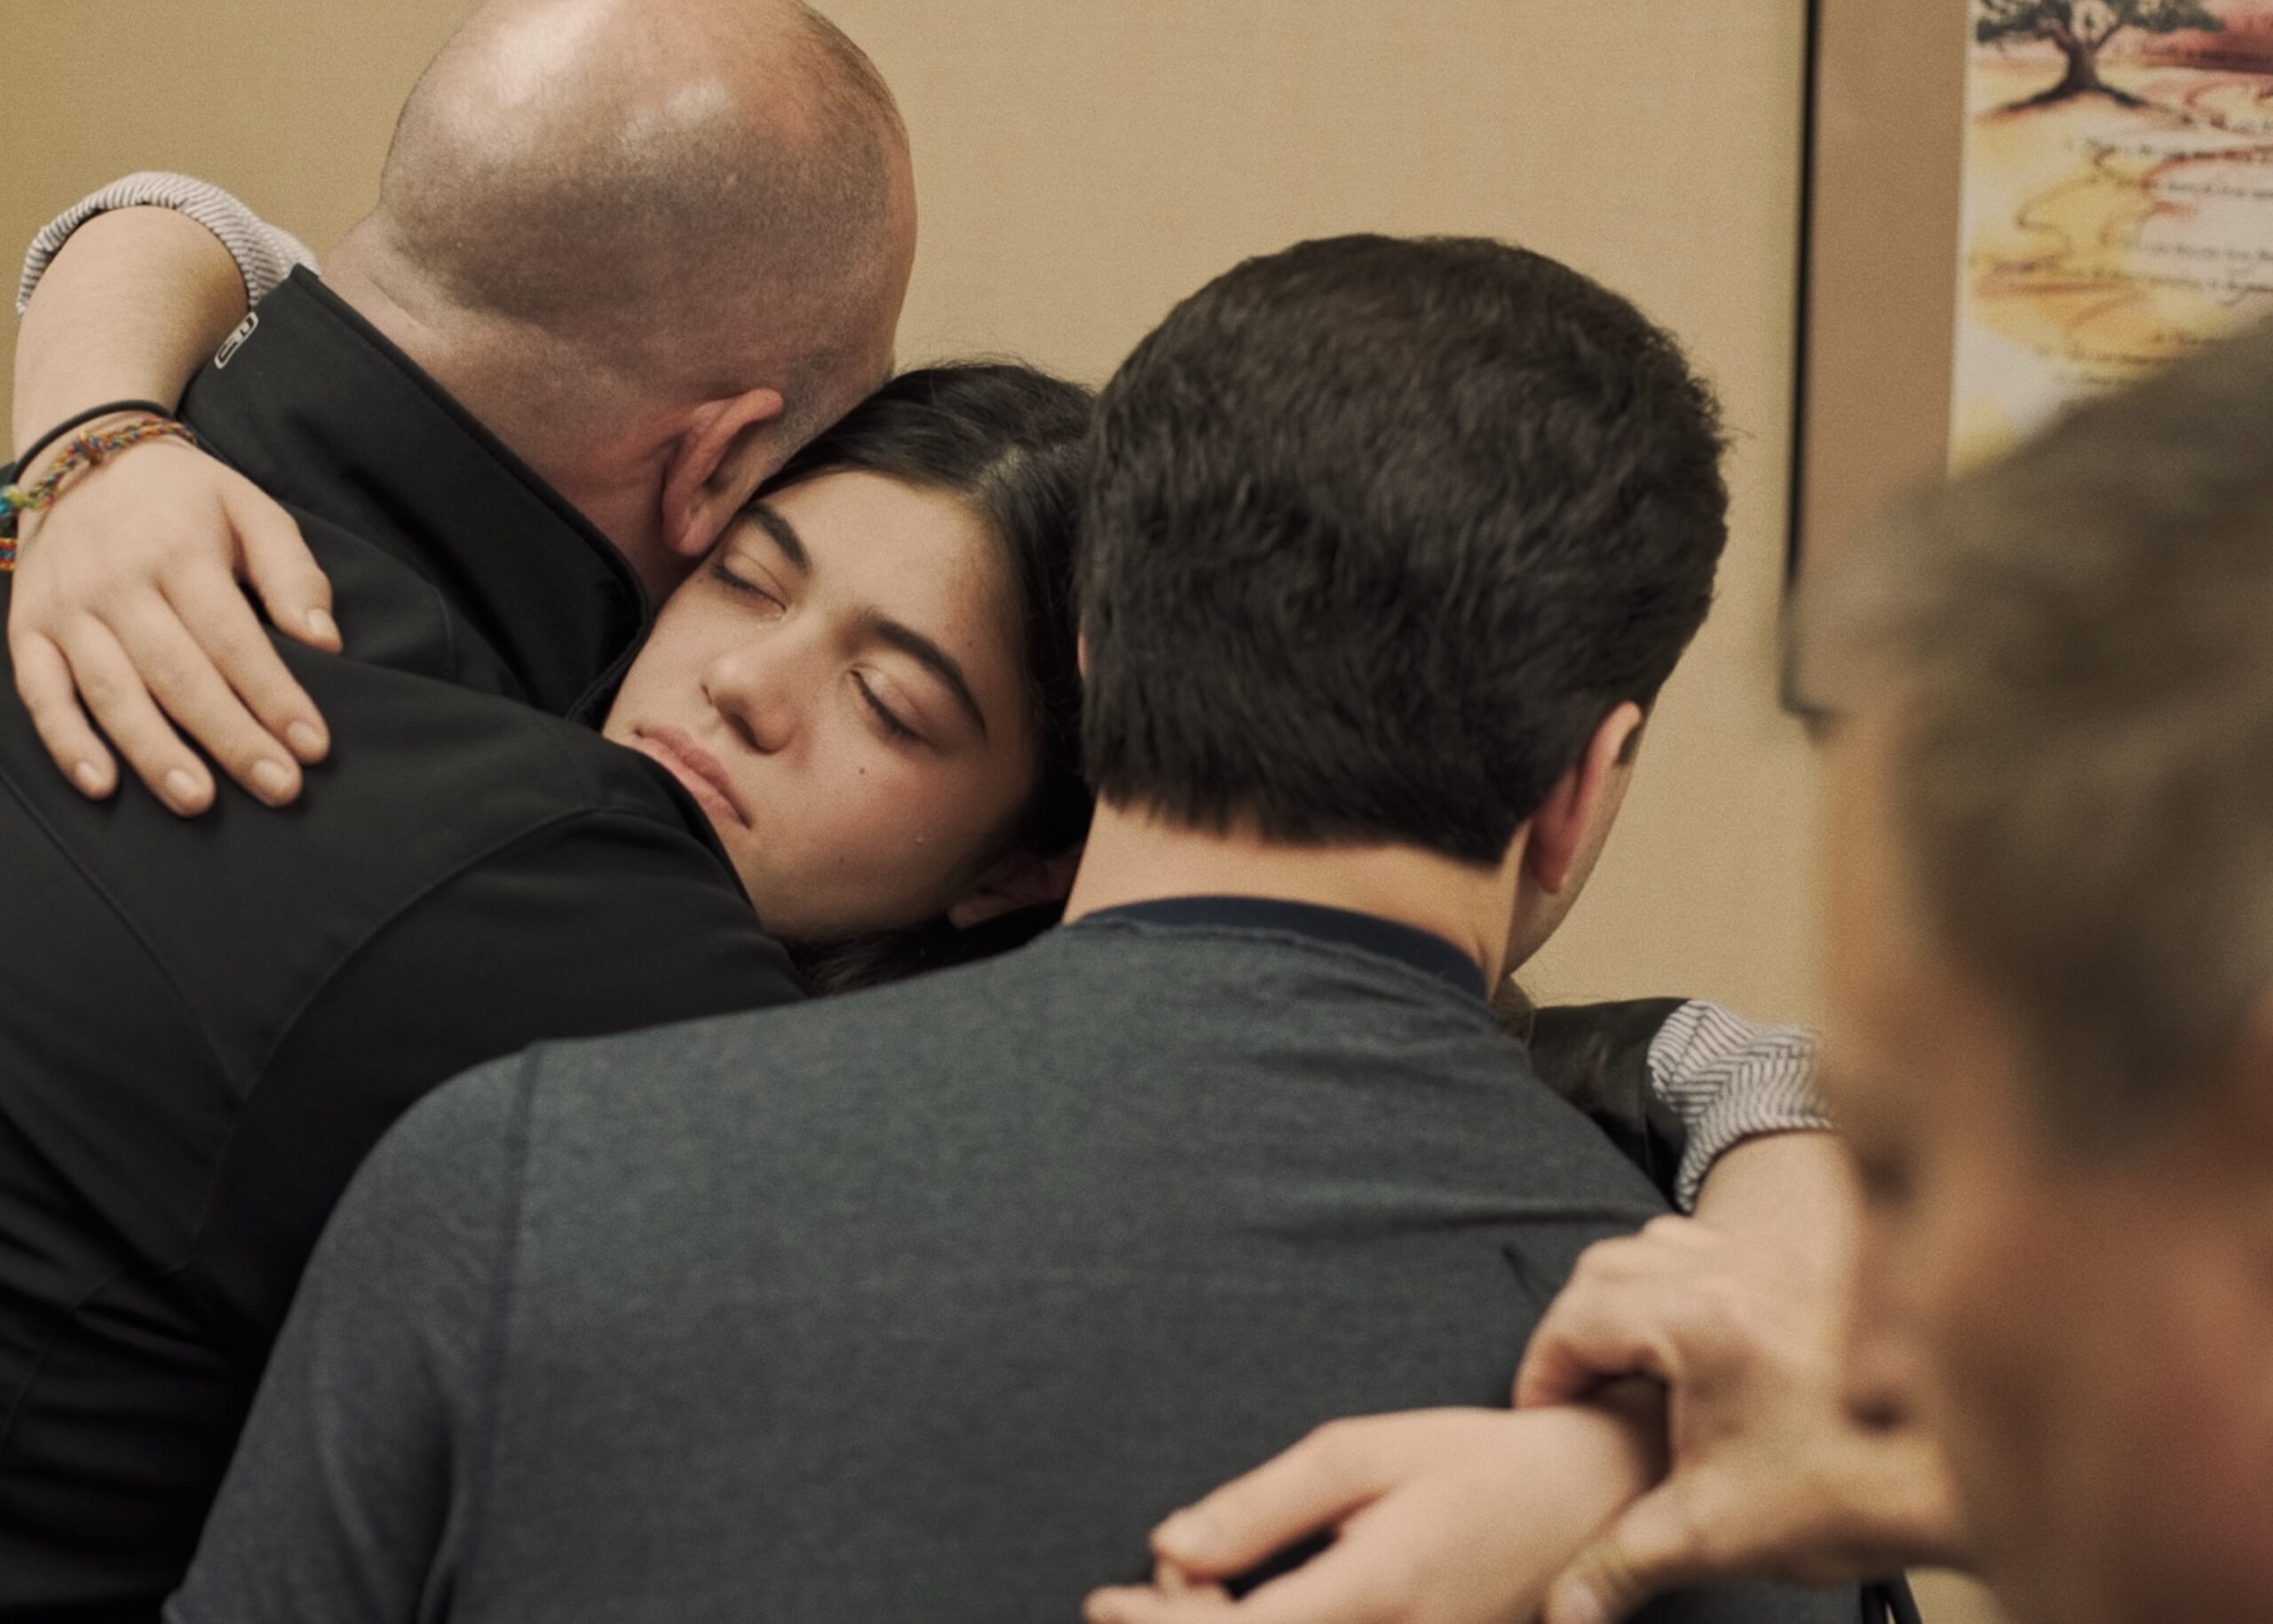 Julie Bruzzese held up by her father and brother in order to have her standing heart rate monitored during an appointment with her Lyme disease specialist, Dr. Richard Horowitz. COURTESY THE QUIET EPIDEMIC